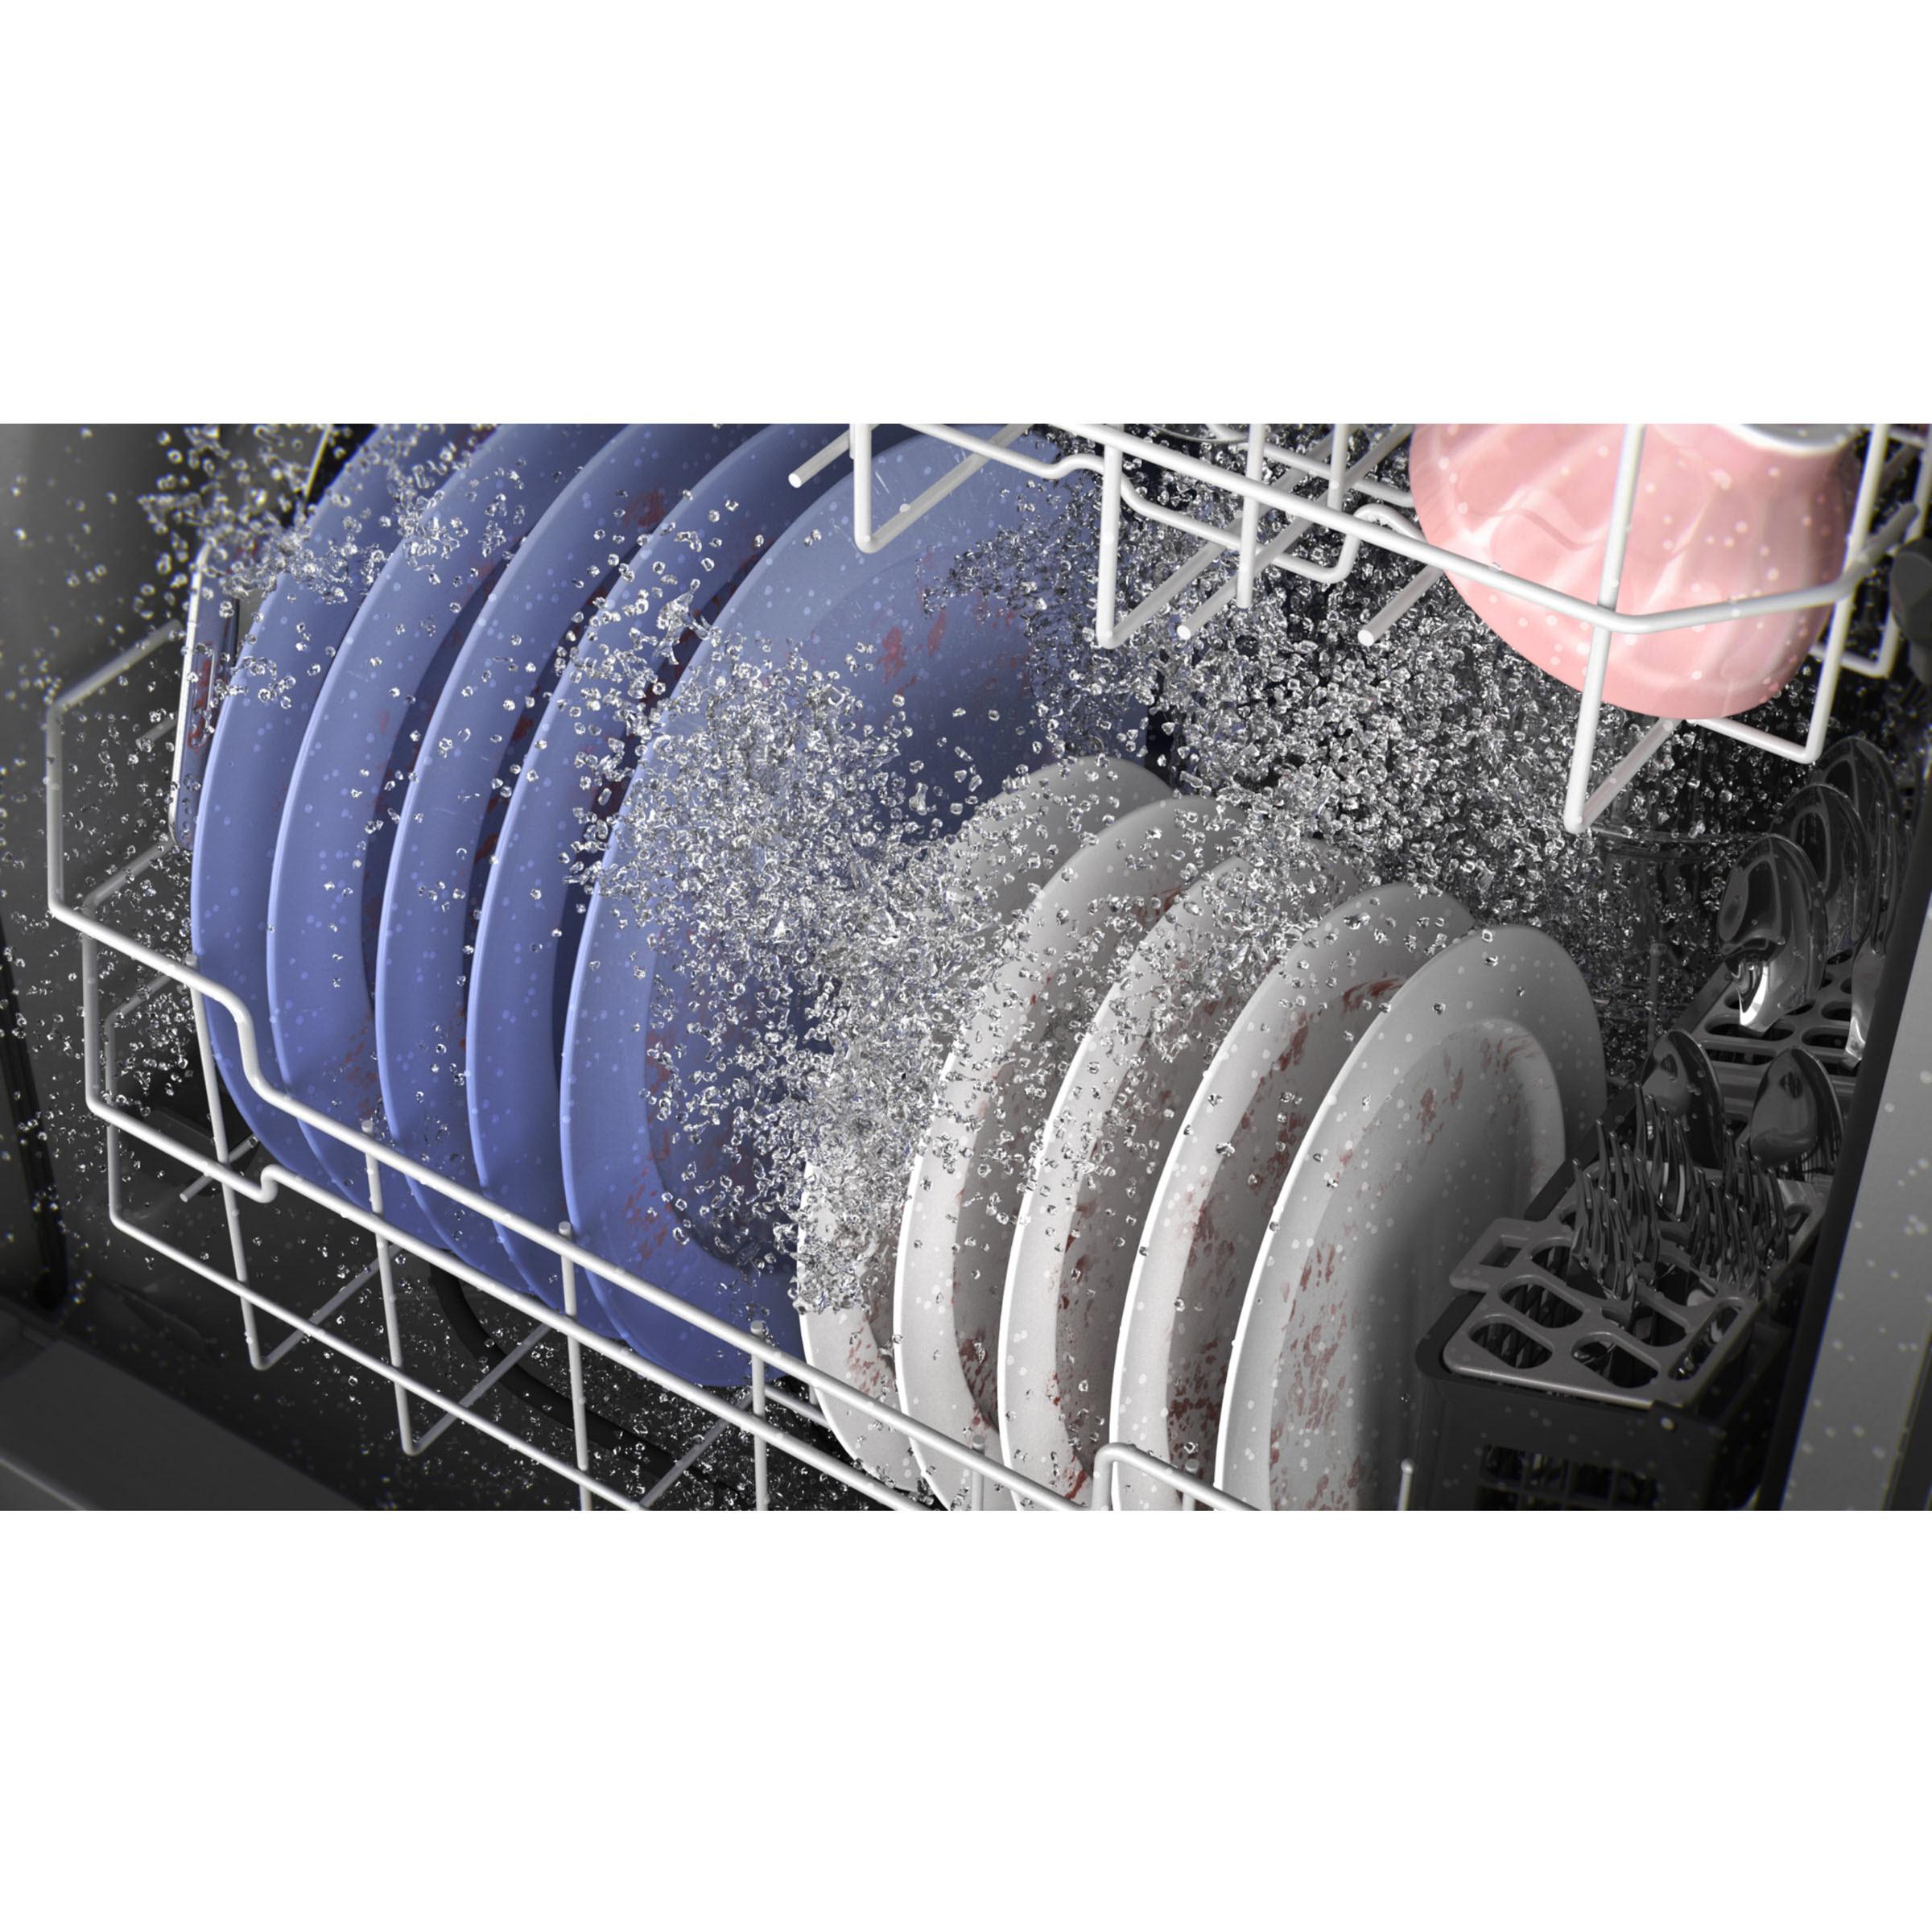 GE 24-inch Built-in Dishwasher with Wi-Fi GDT635HSRSS